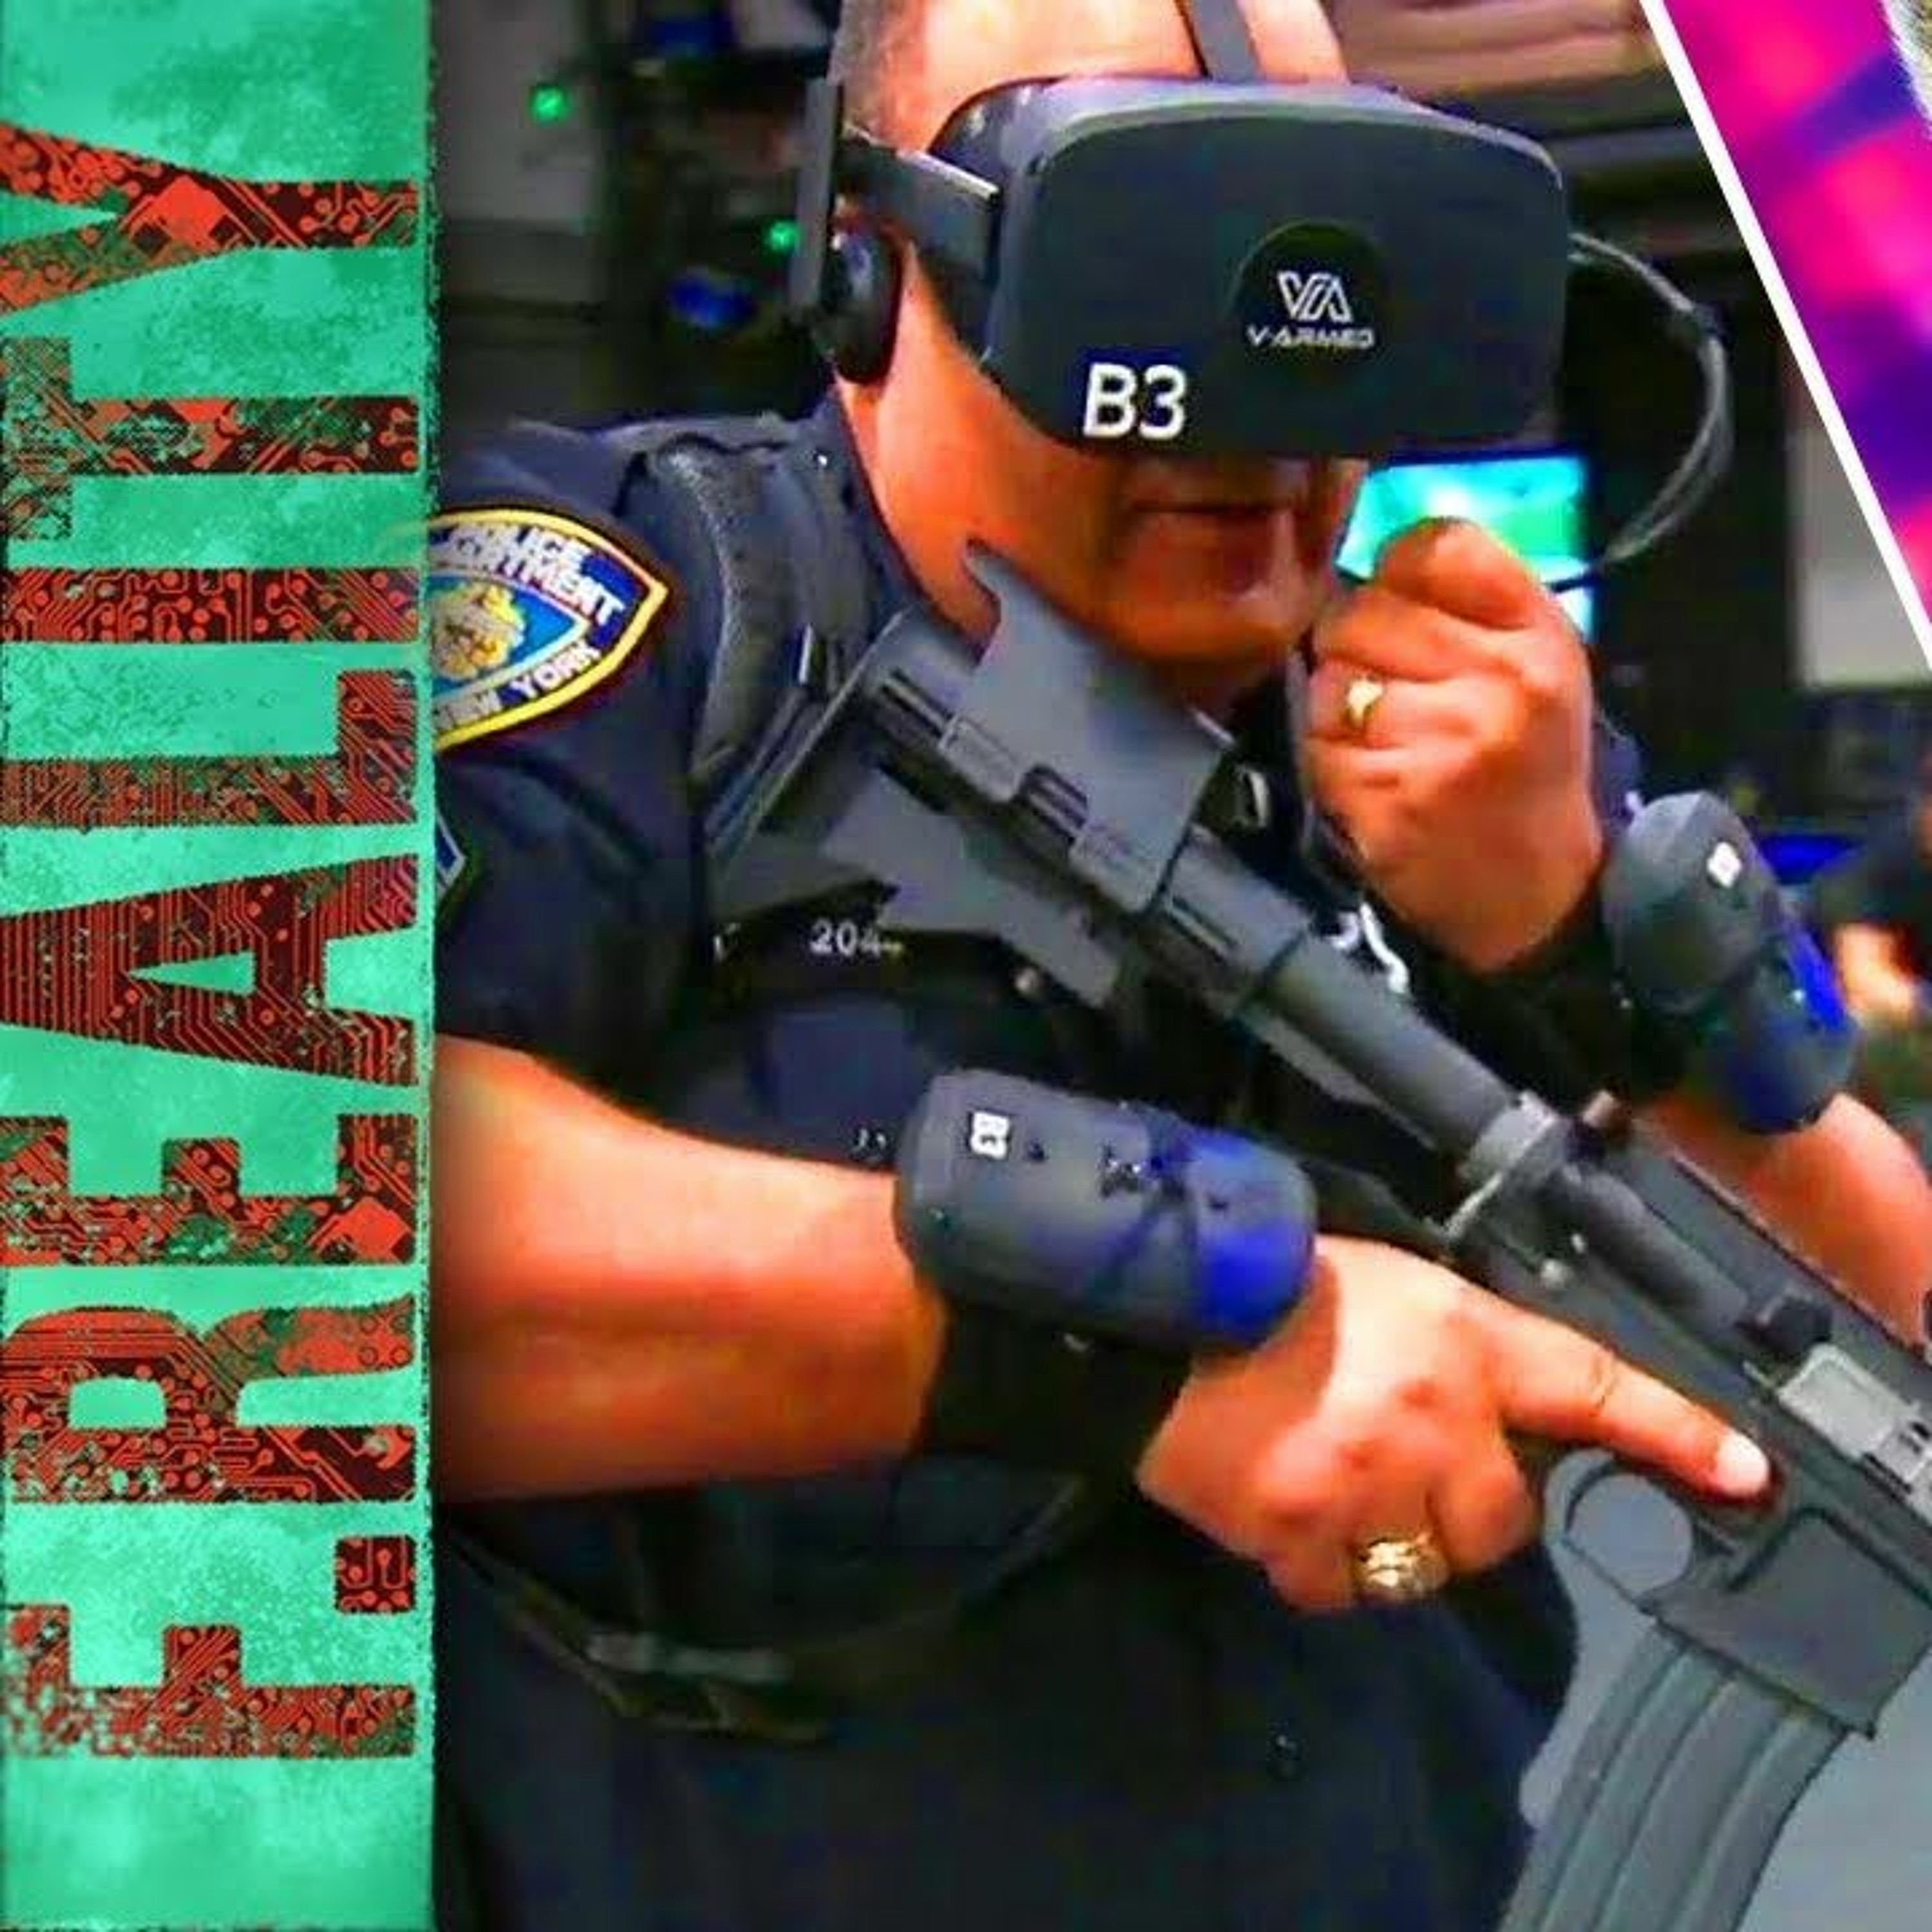 Ep.88 - Detective Pikachu AR Game, NYPD VR Training & HP Reverb US Only?